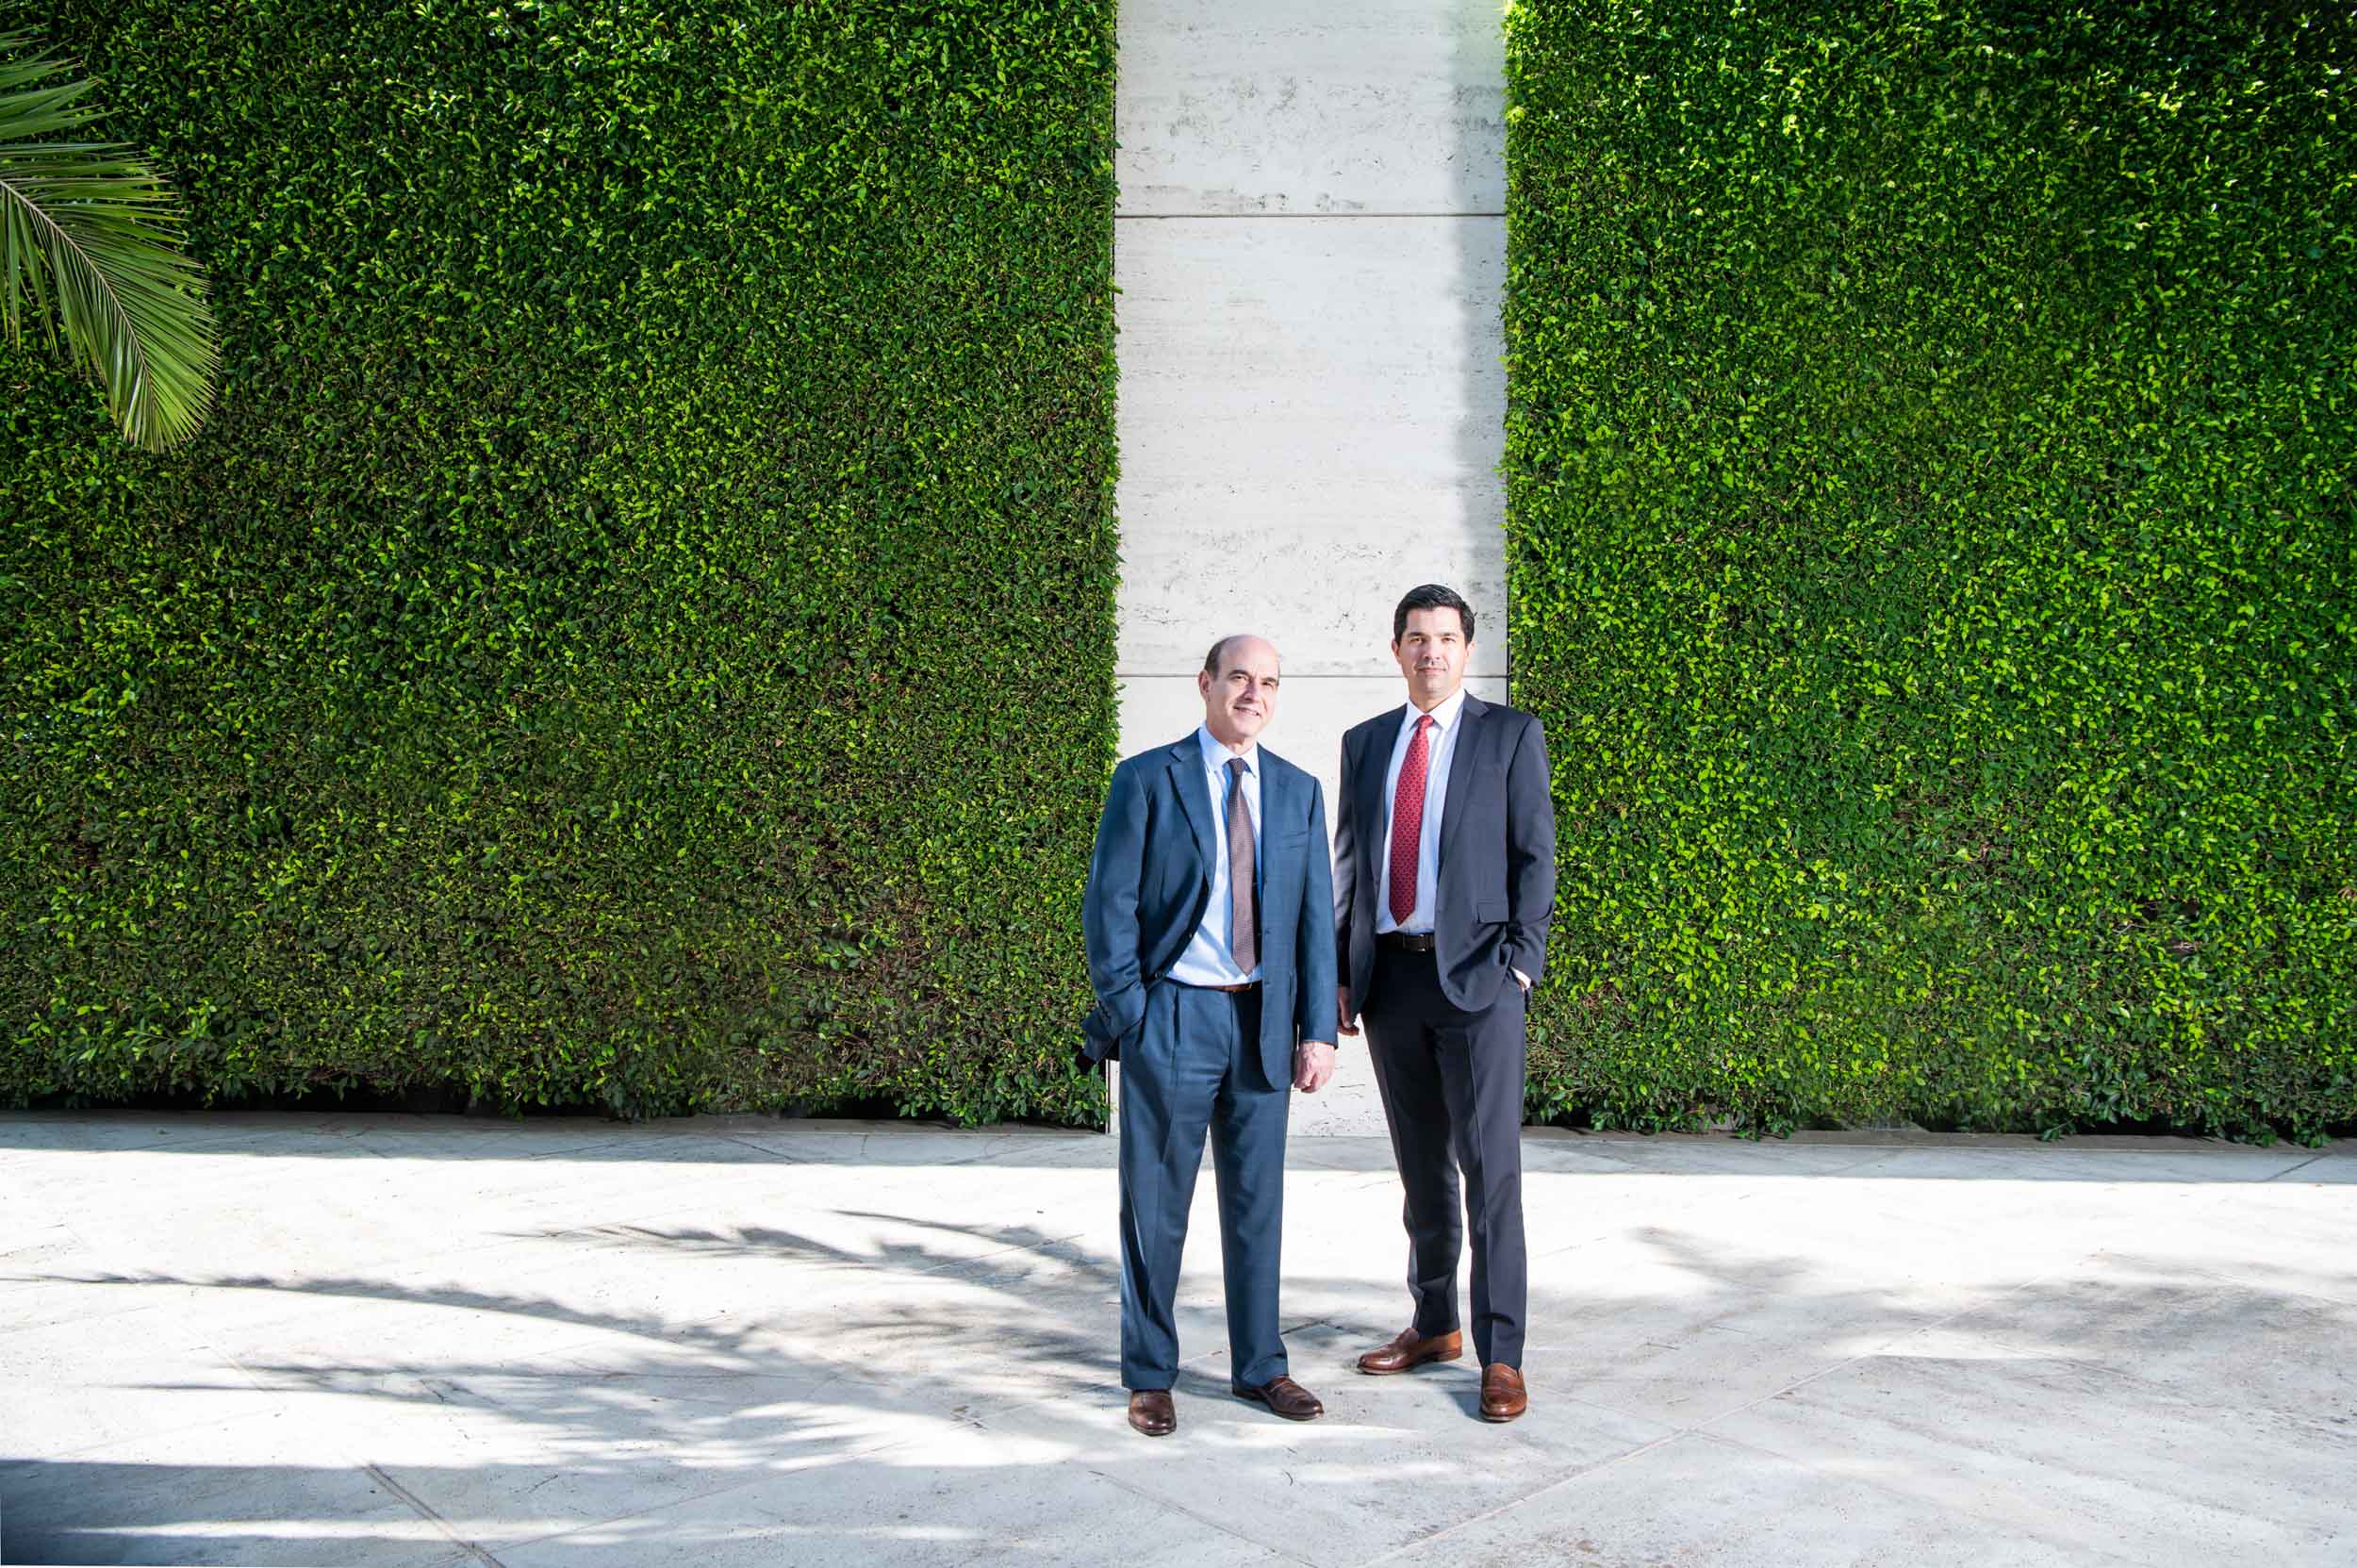 Corporate executives portrait for Financial Advisor Magazine in Los Angeles.